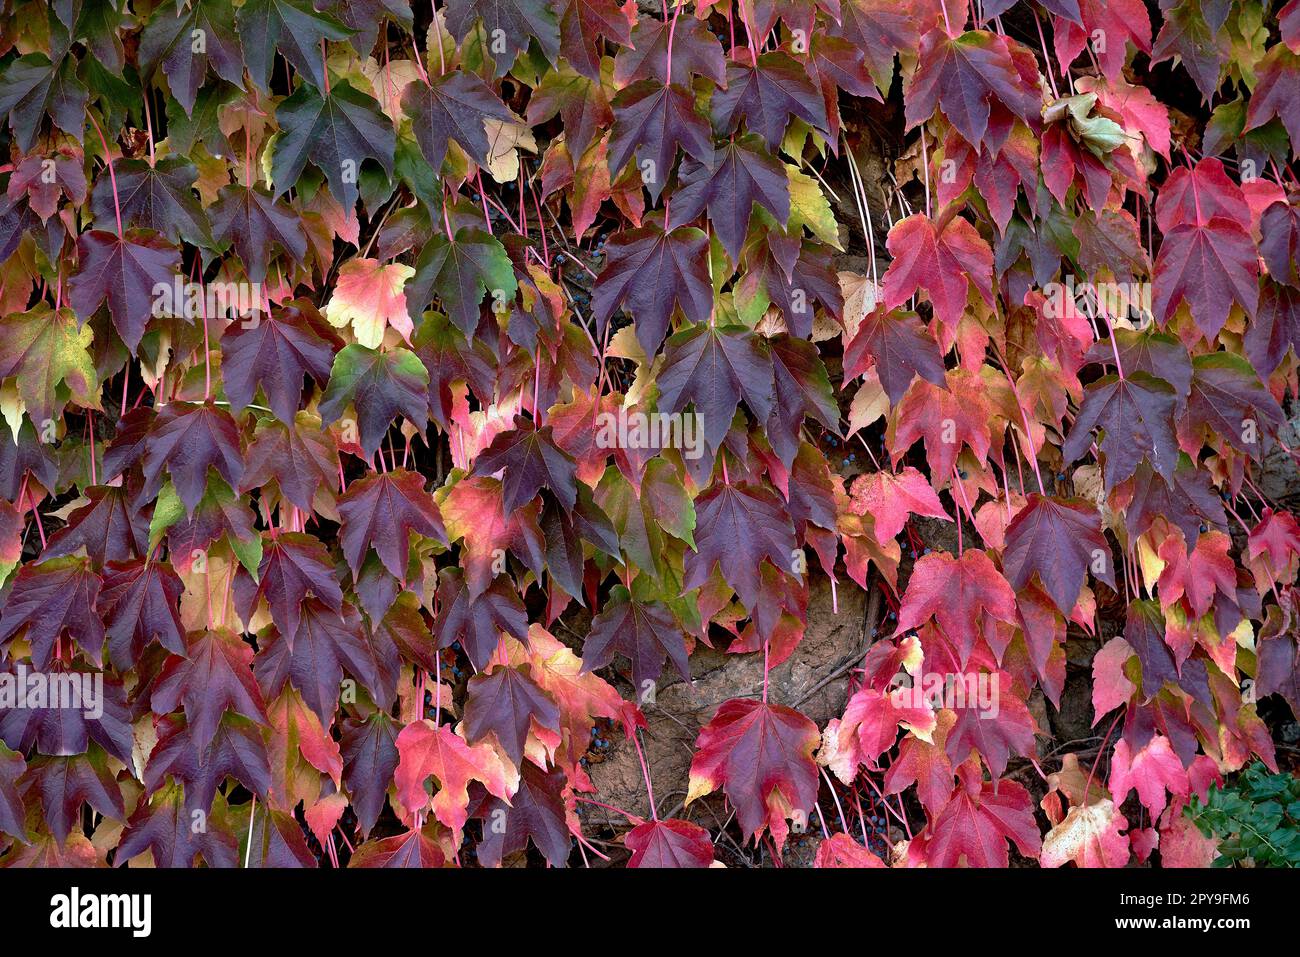 Cluster of ivy leaves and fruits in autumn Stock Photo